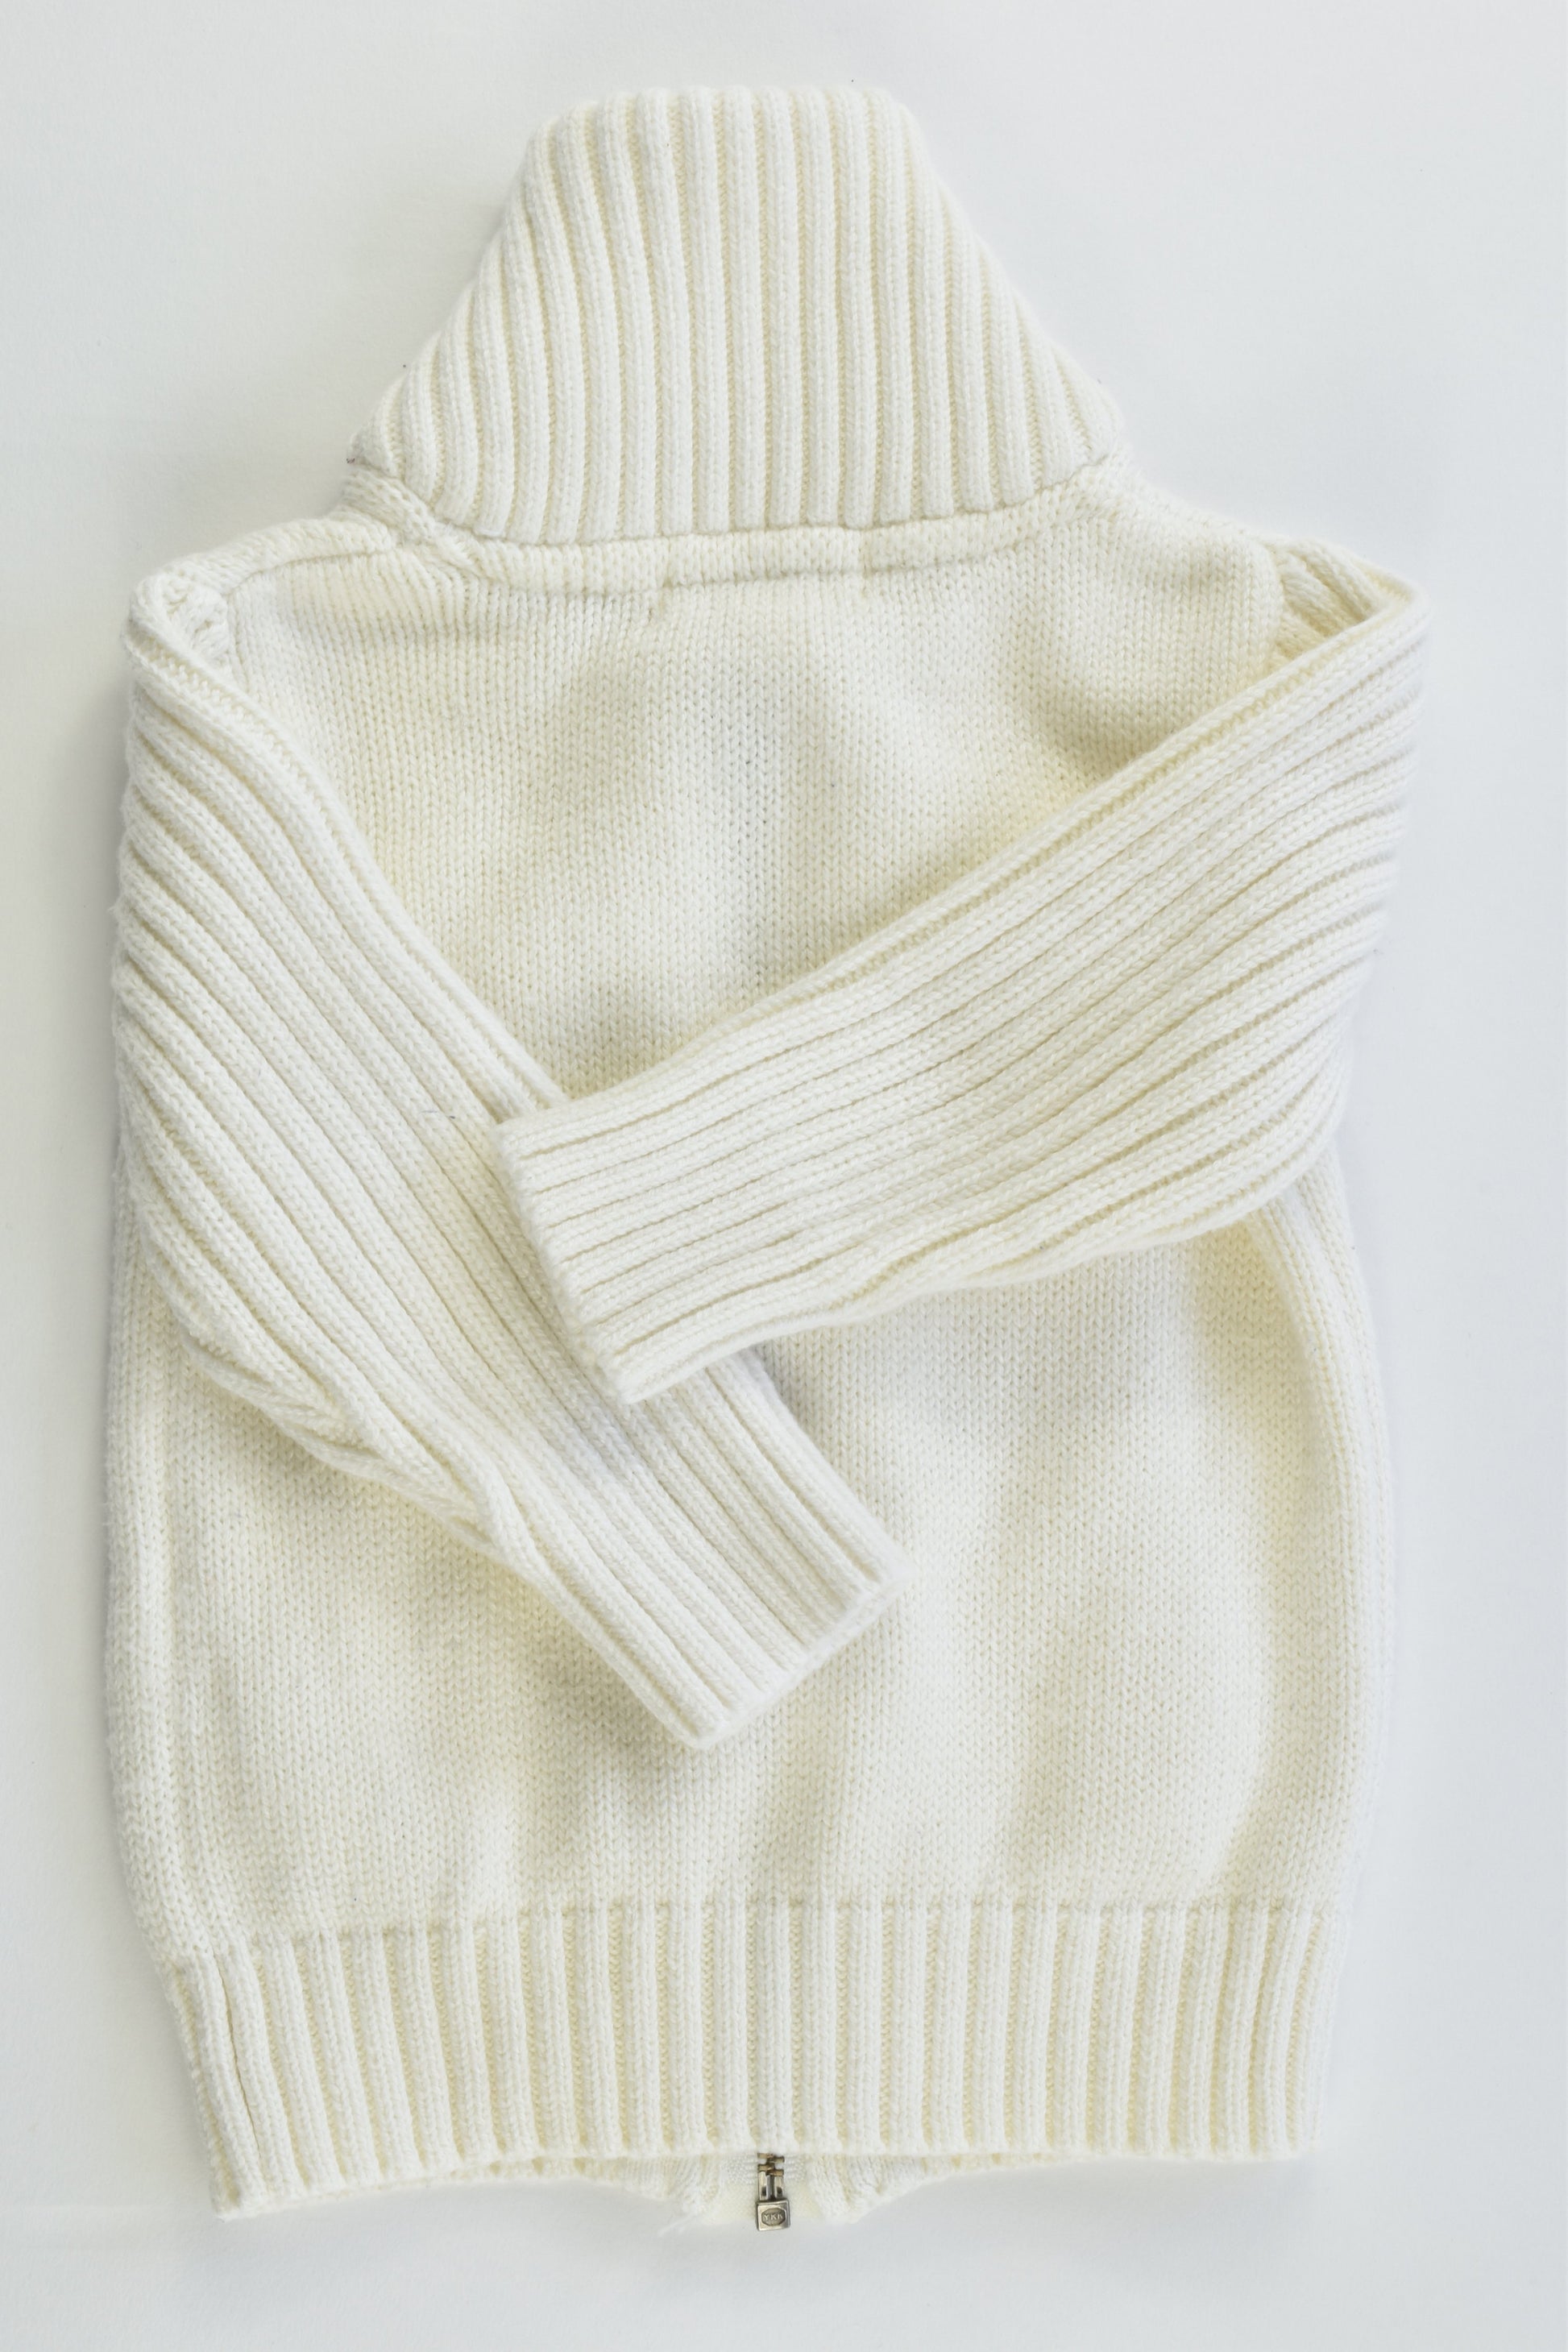 Purebaby Size 000 (0-3 months) Knitted Jumper